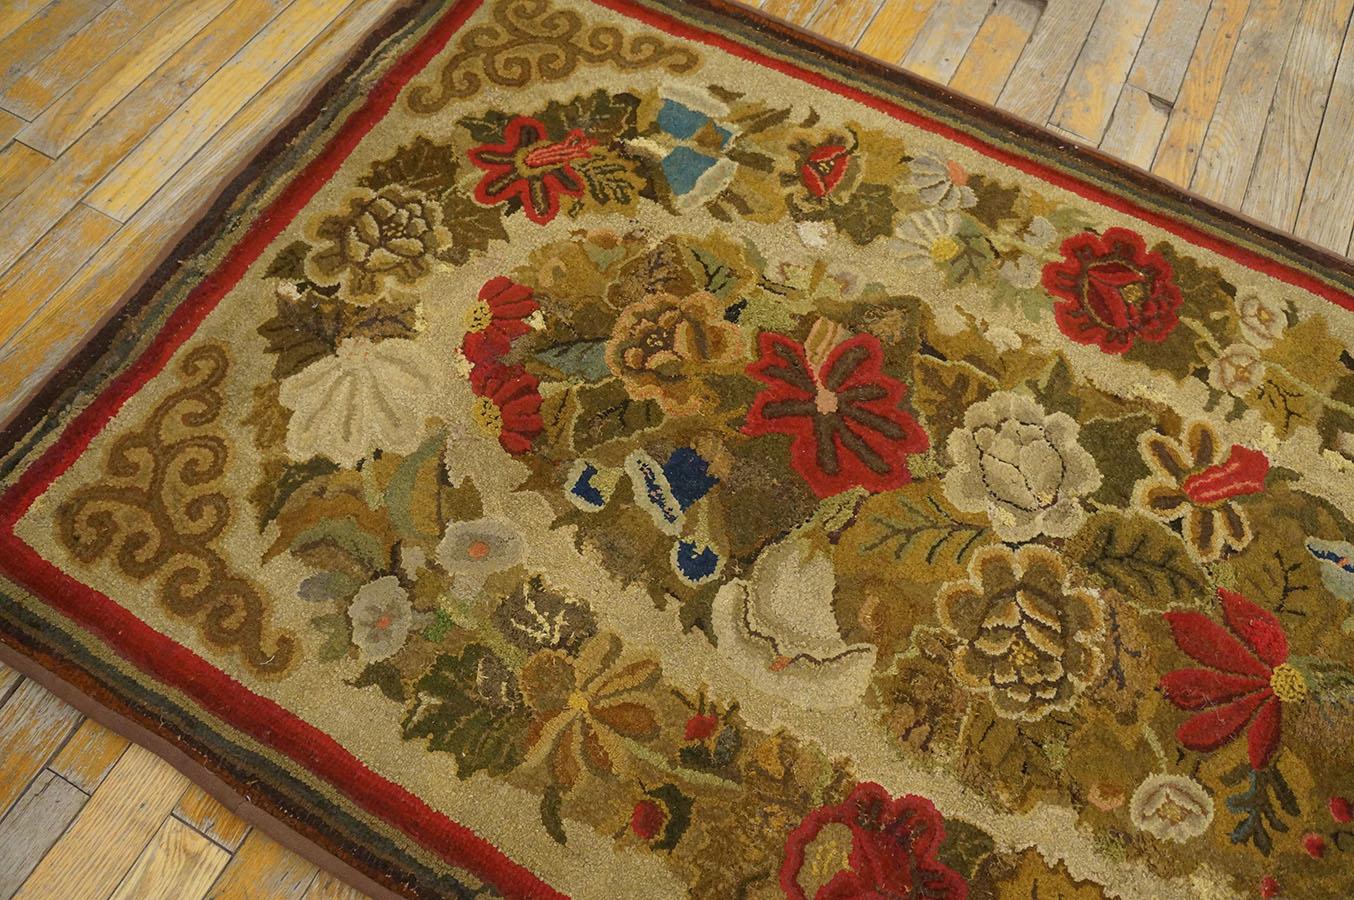 19th Century American Hooked Rug ( 3'3'' x 5' - 99 x 152 ) For Sale 7